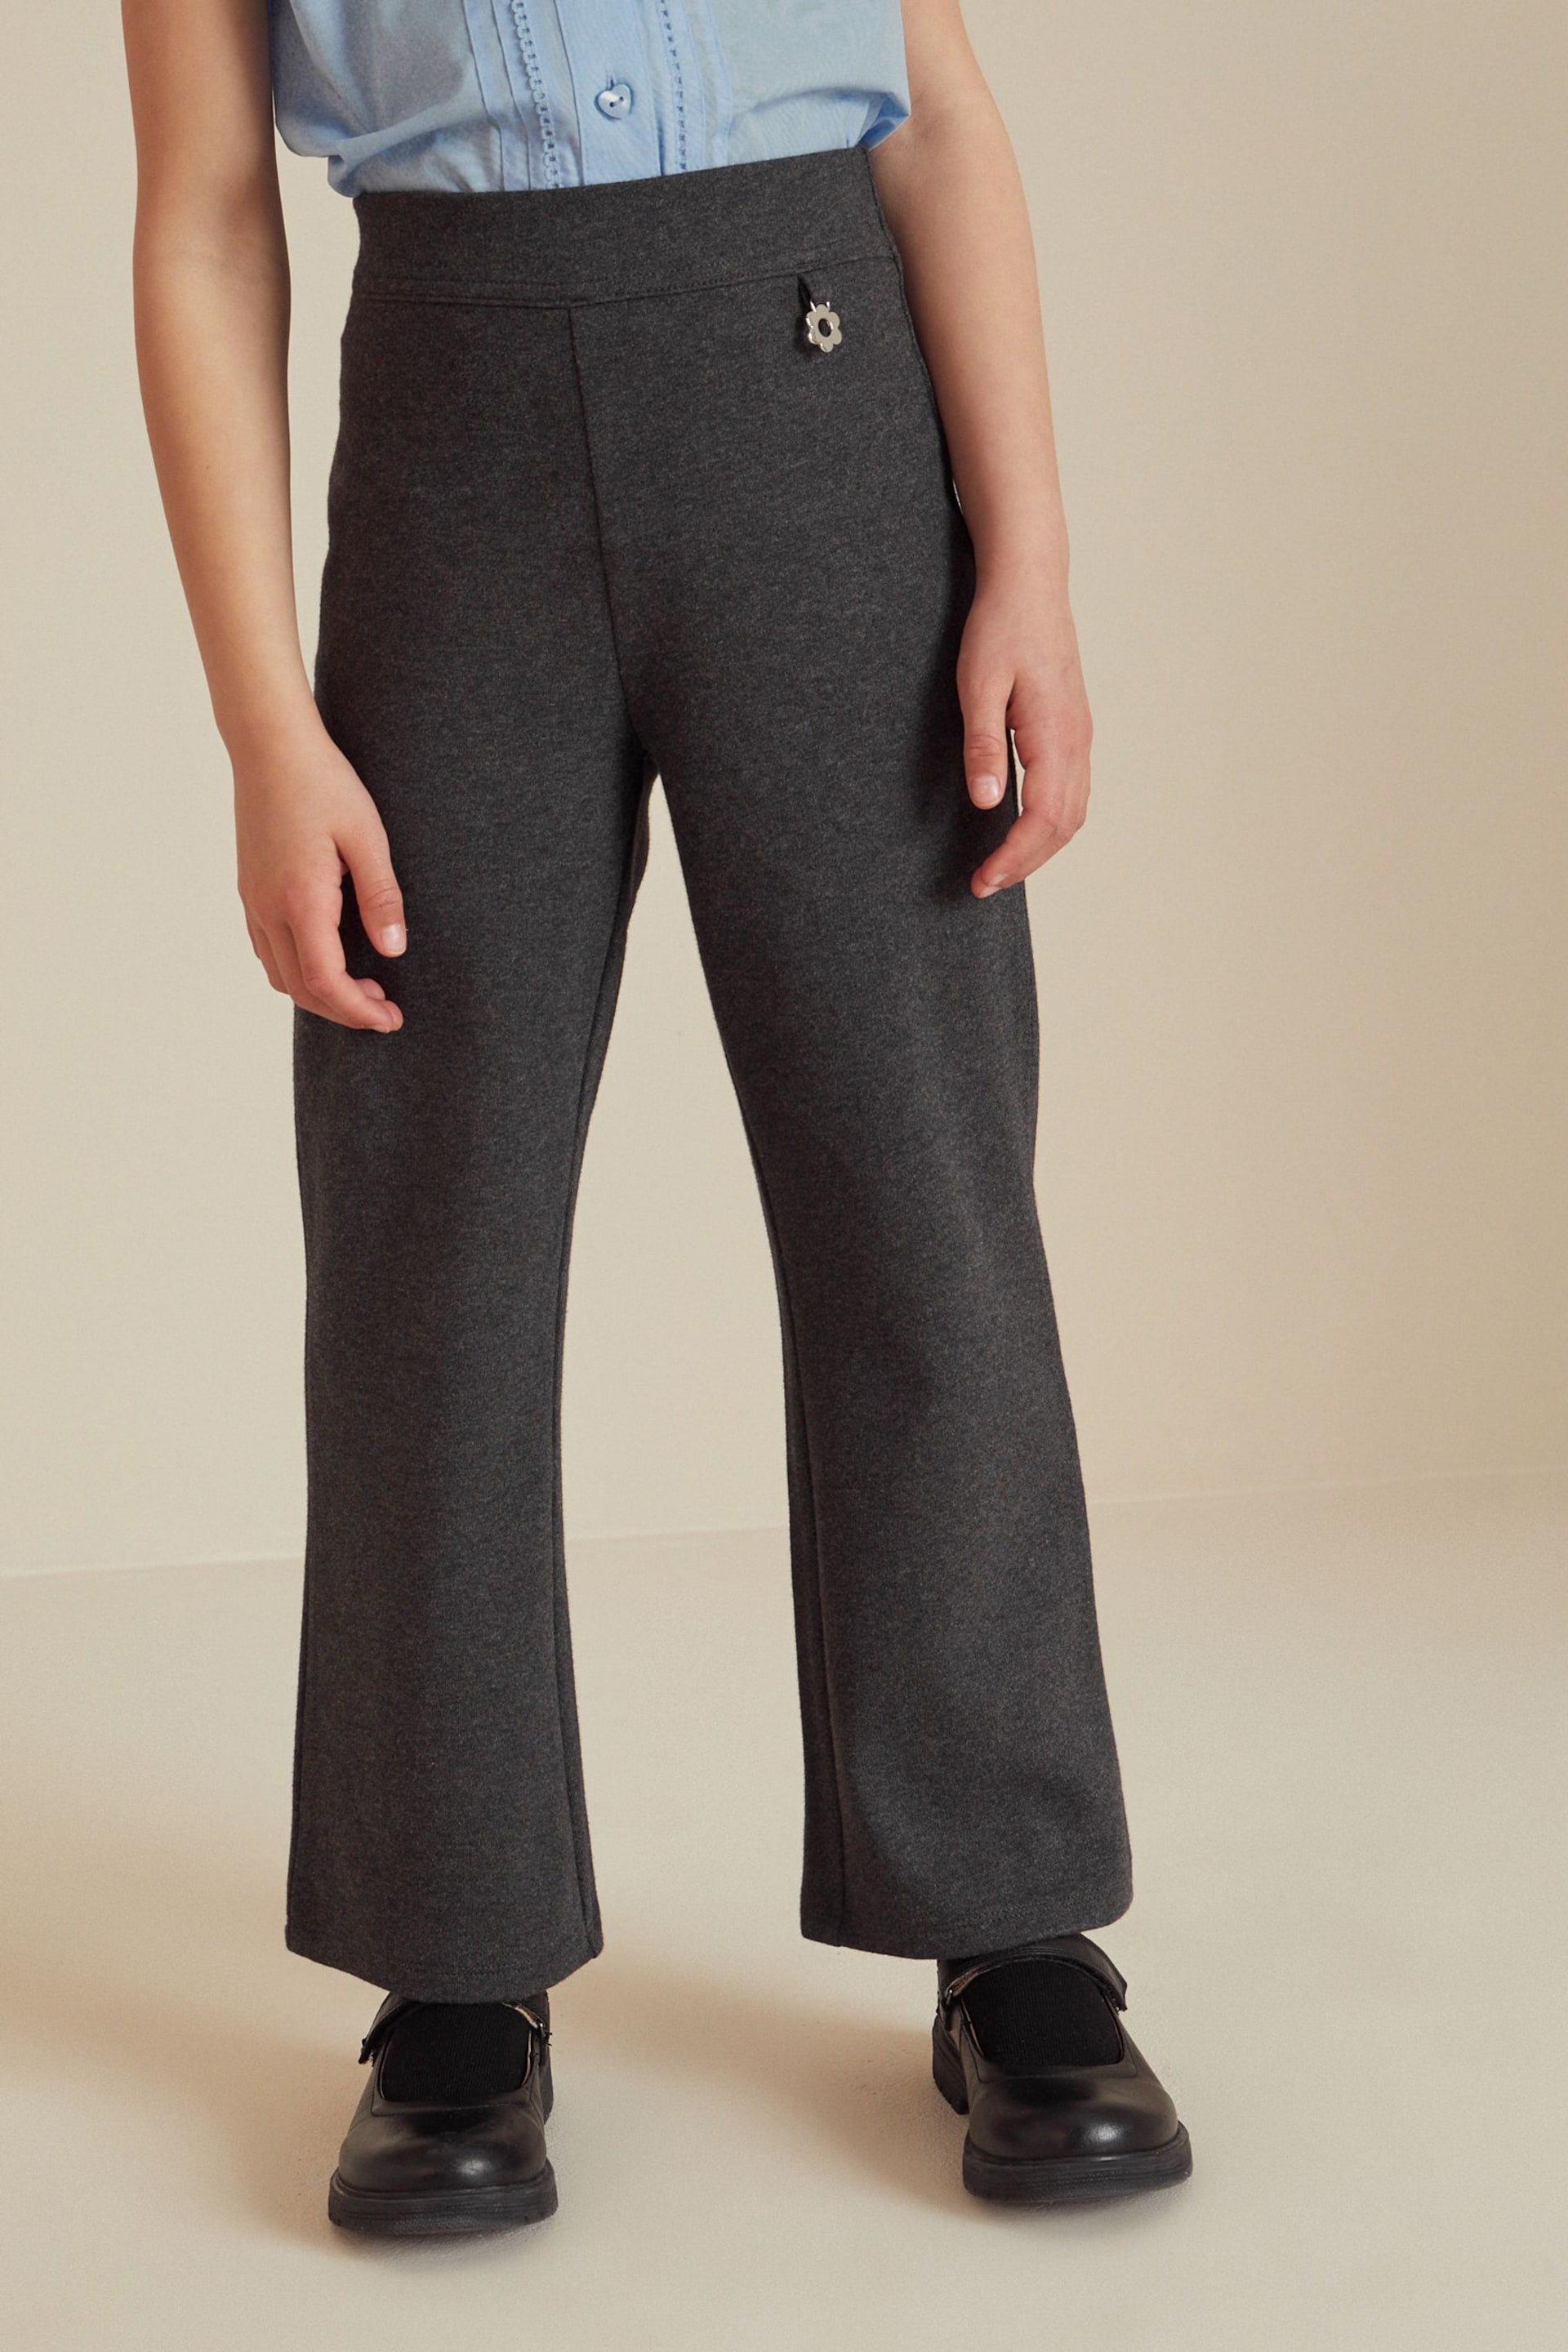 Charcoal Grey Cotton Rich Jersey Stretch Pull-On Boot Cut Trousers (3-16yrs) - Image 1 of 8